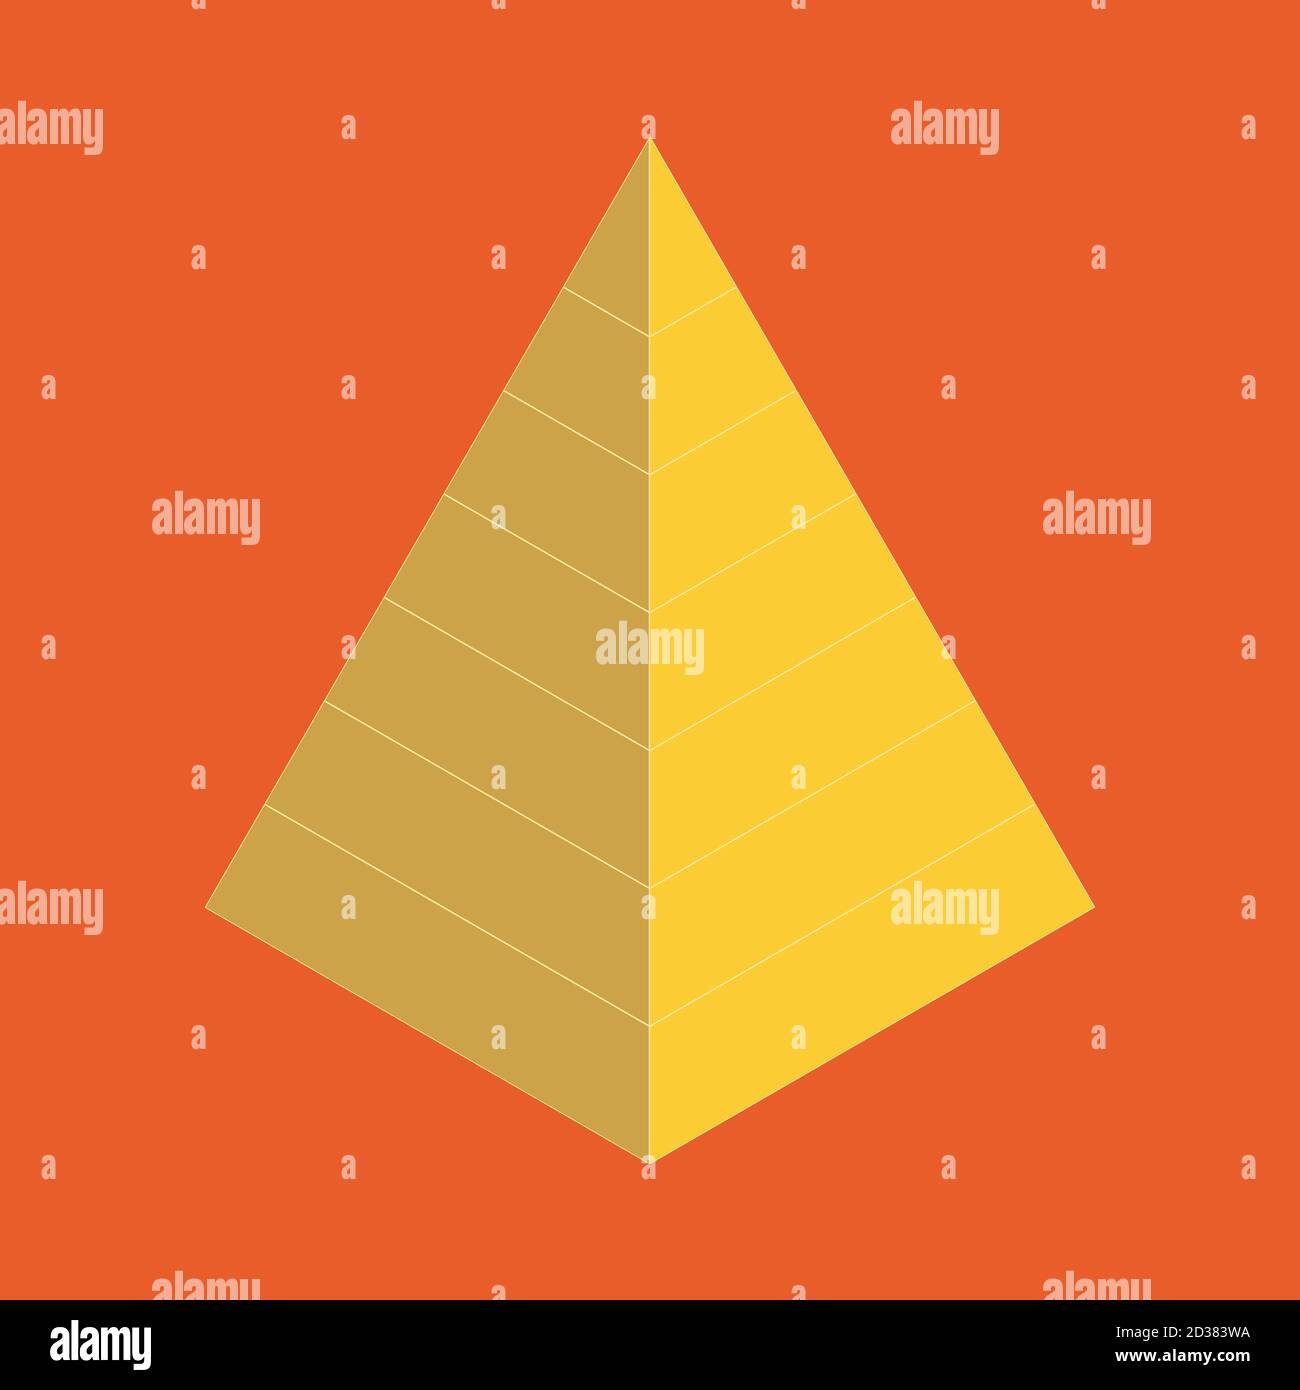 An abstract 3d golden pyramid shape against an orange background. Stock Photo